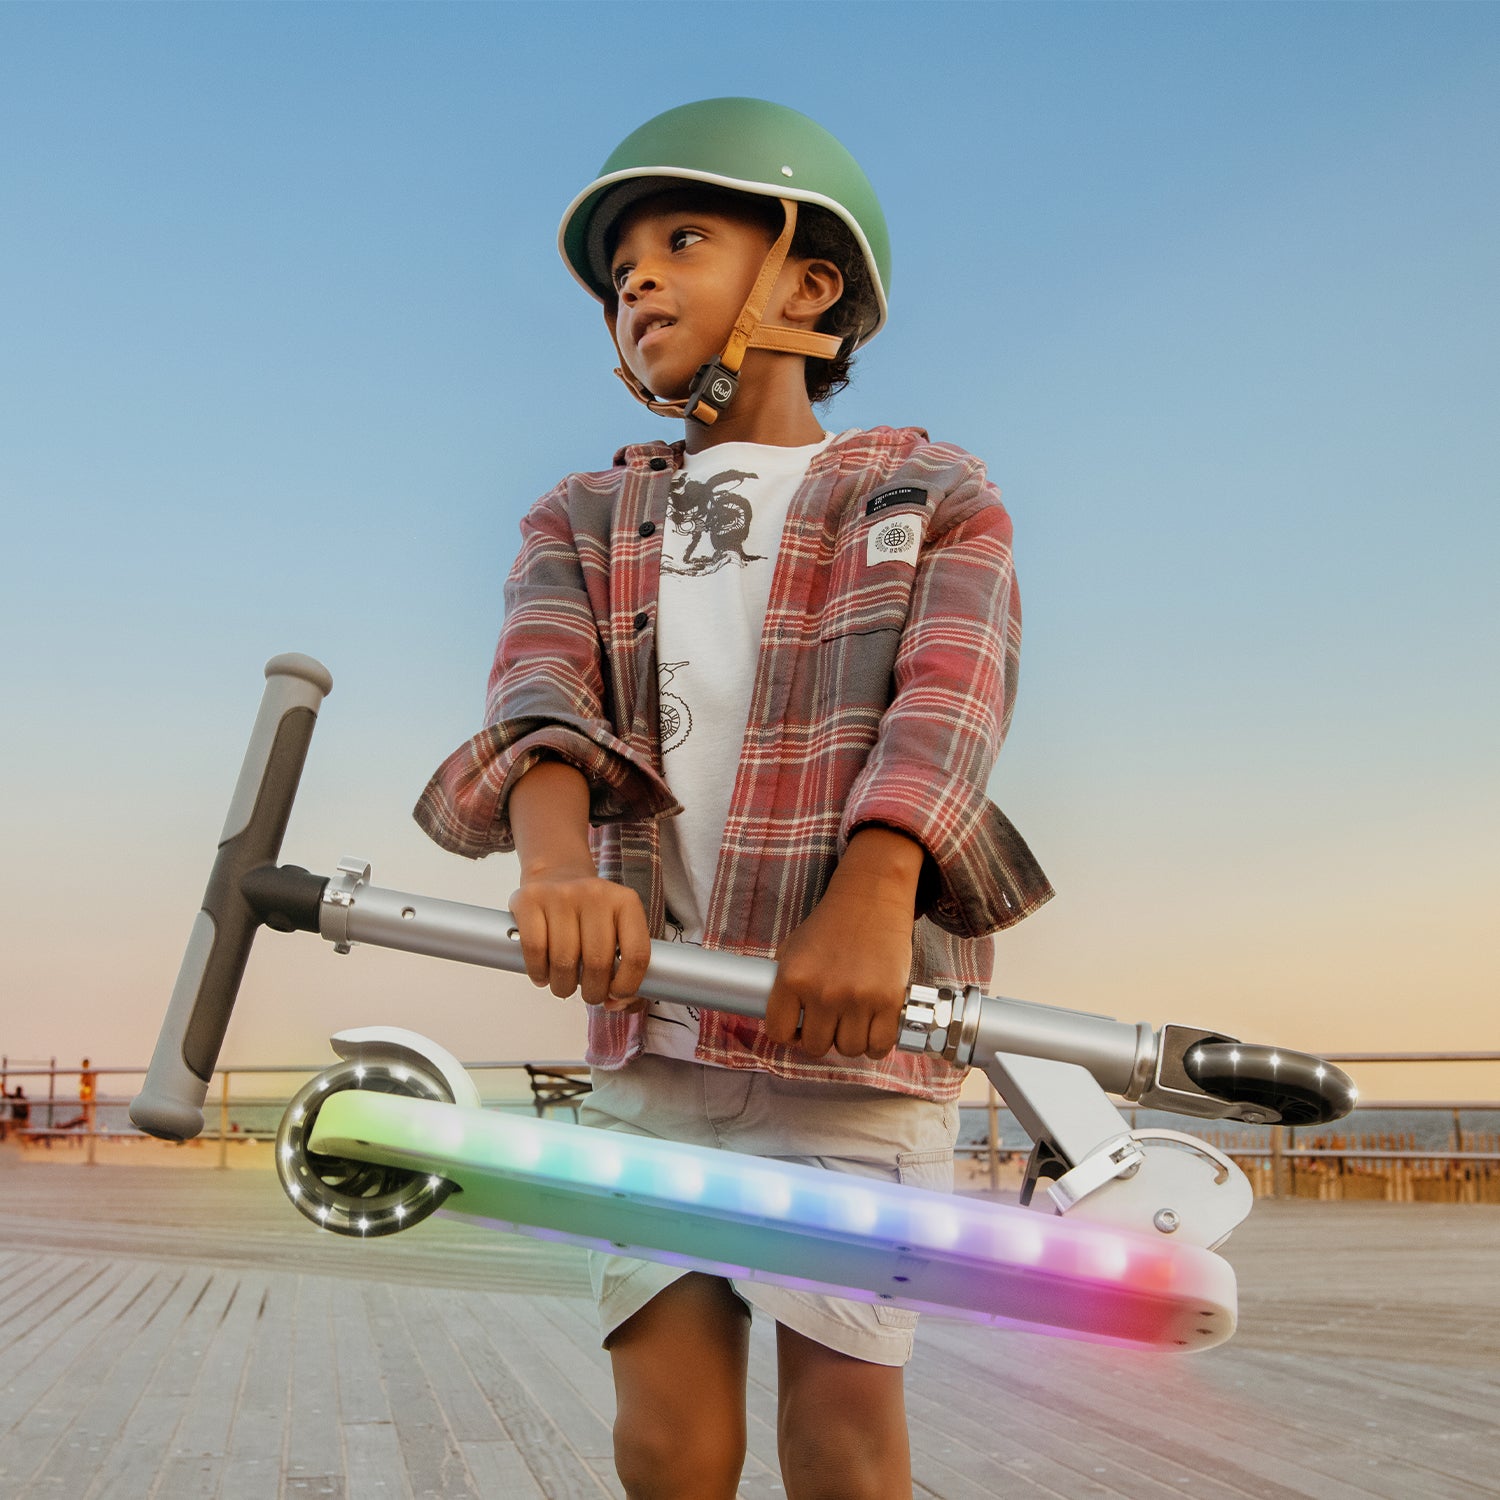 kid holding a folded silver helio x kick scooter